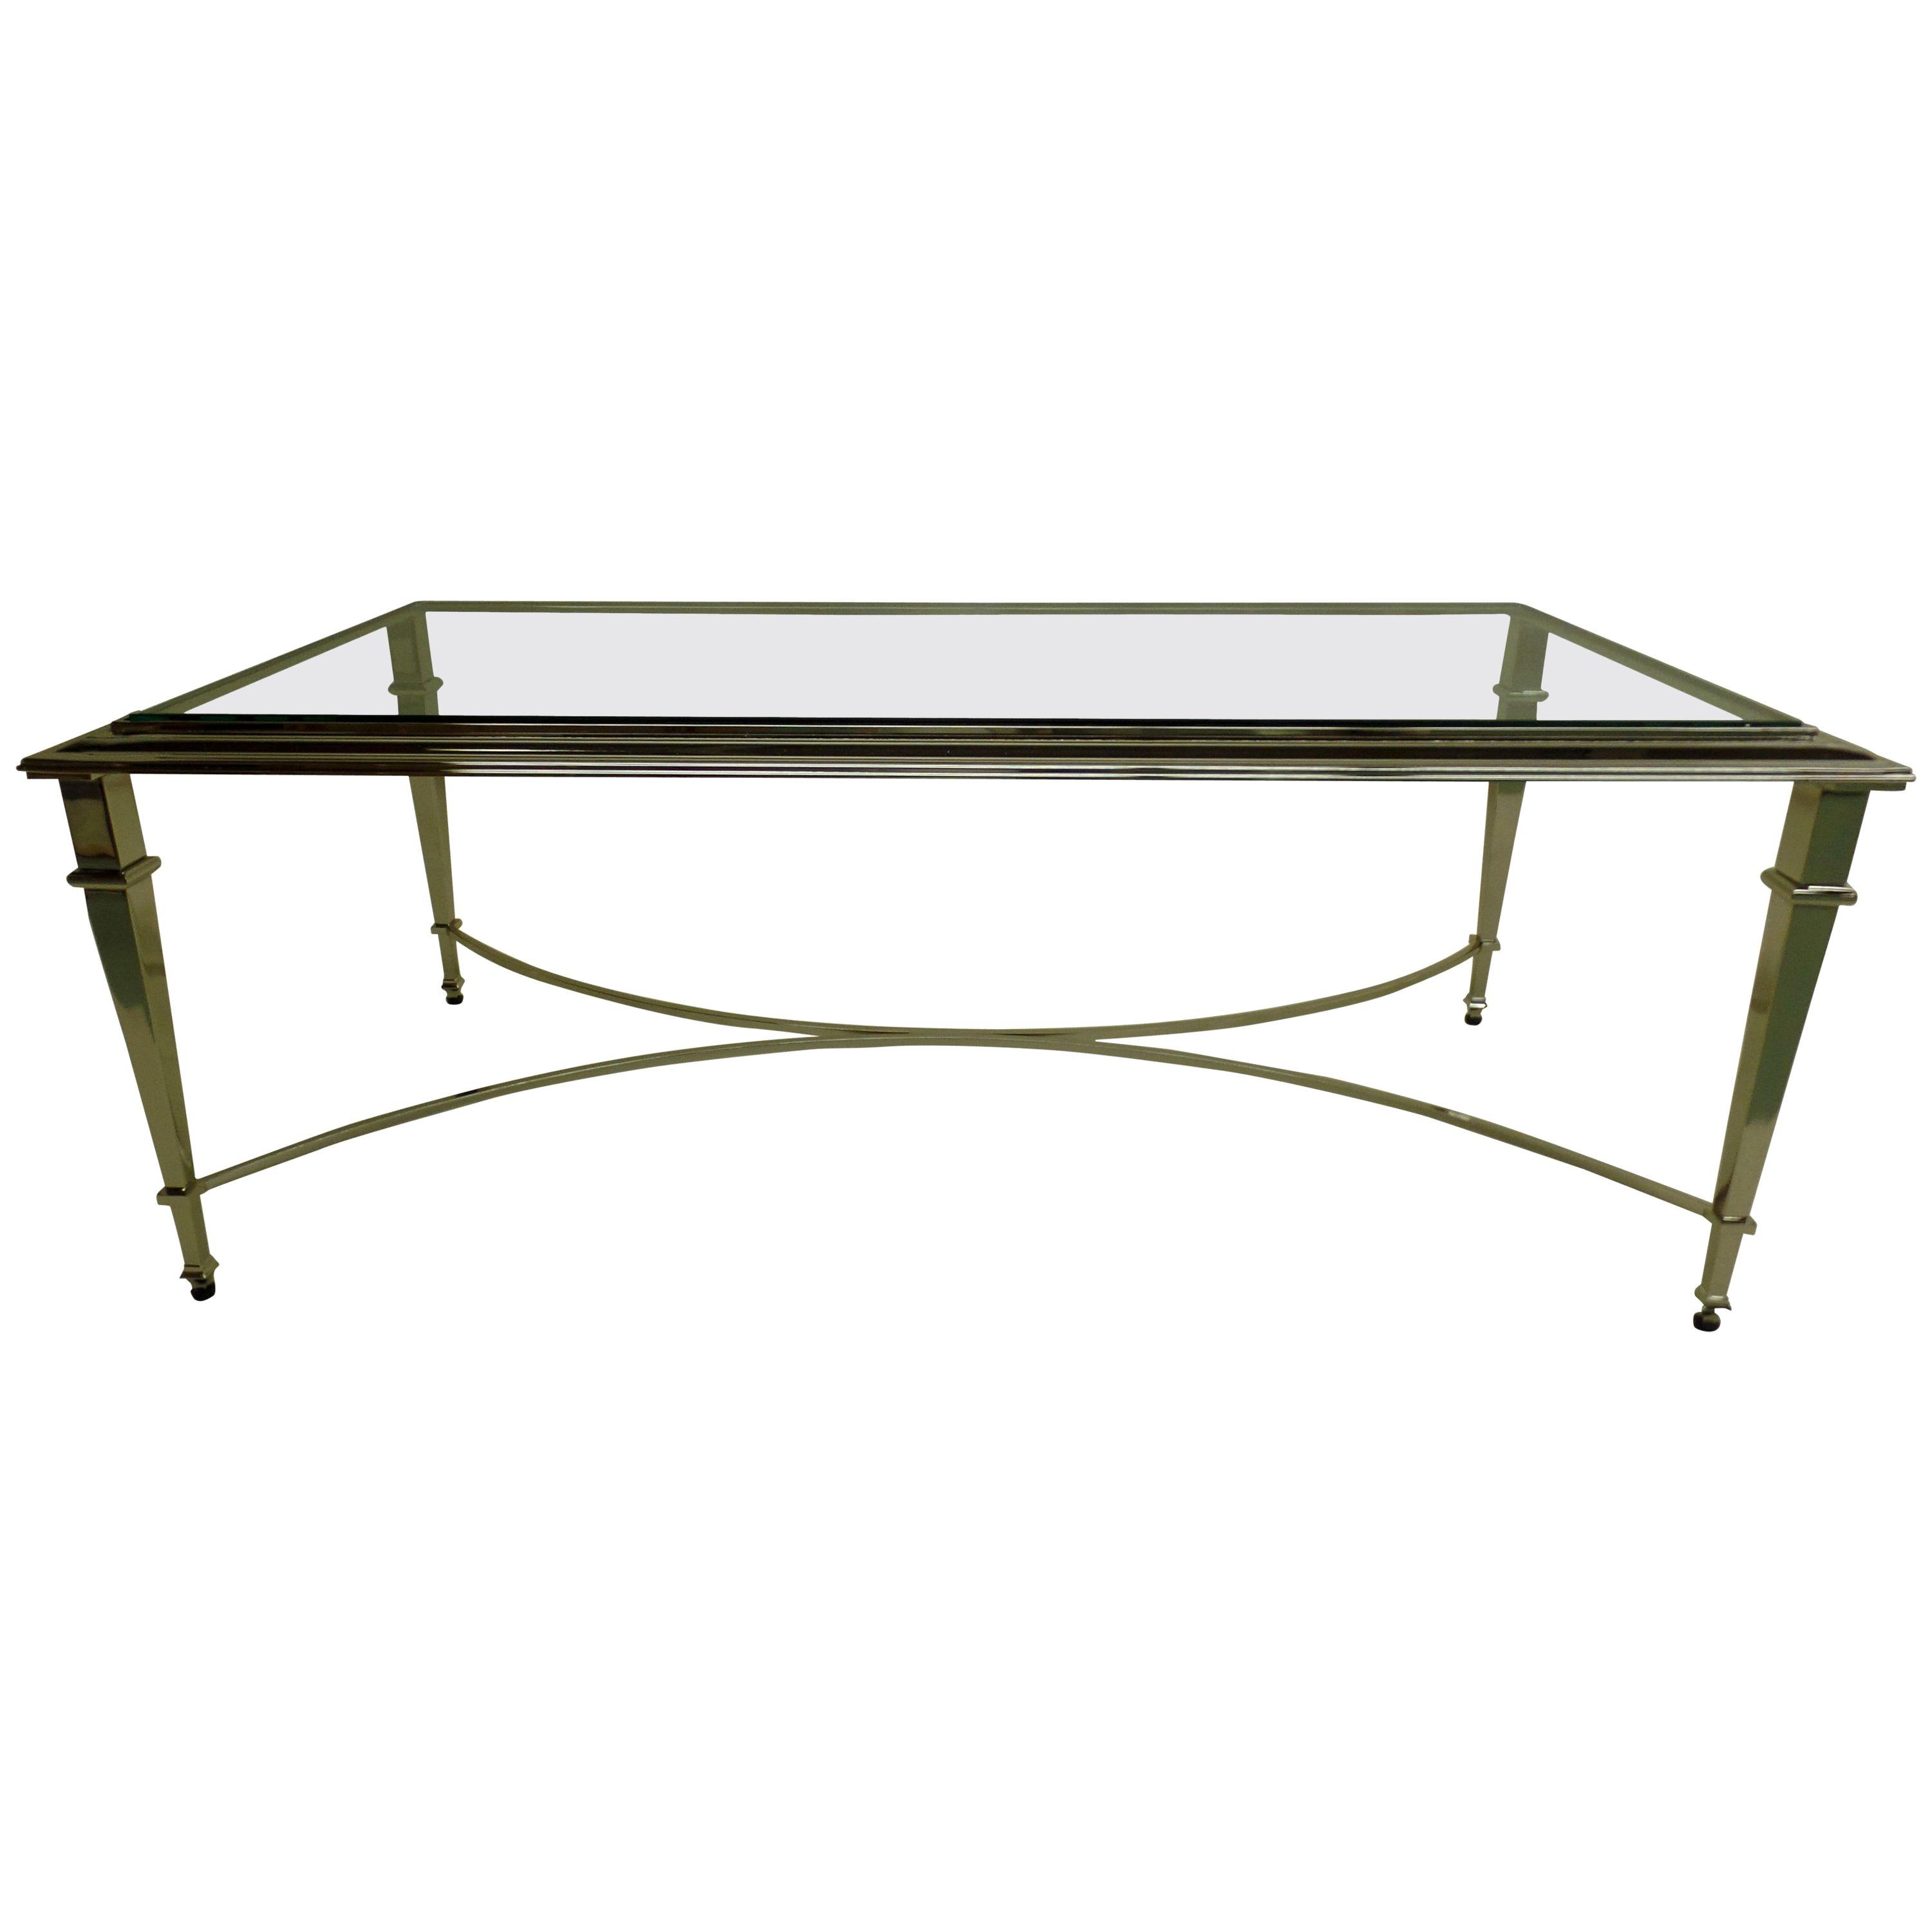 French Modern Neoclassical Polished Nickel and Glass Coffee Table, Maison Ramsay For Sale